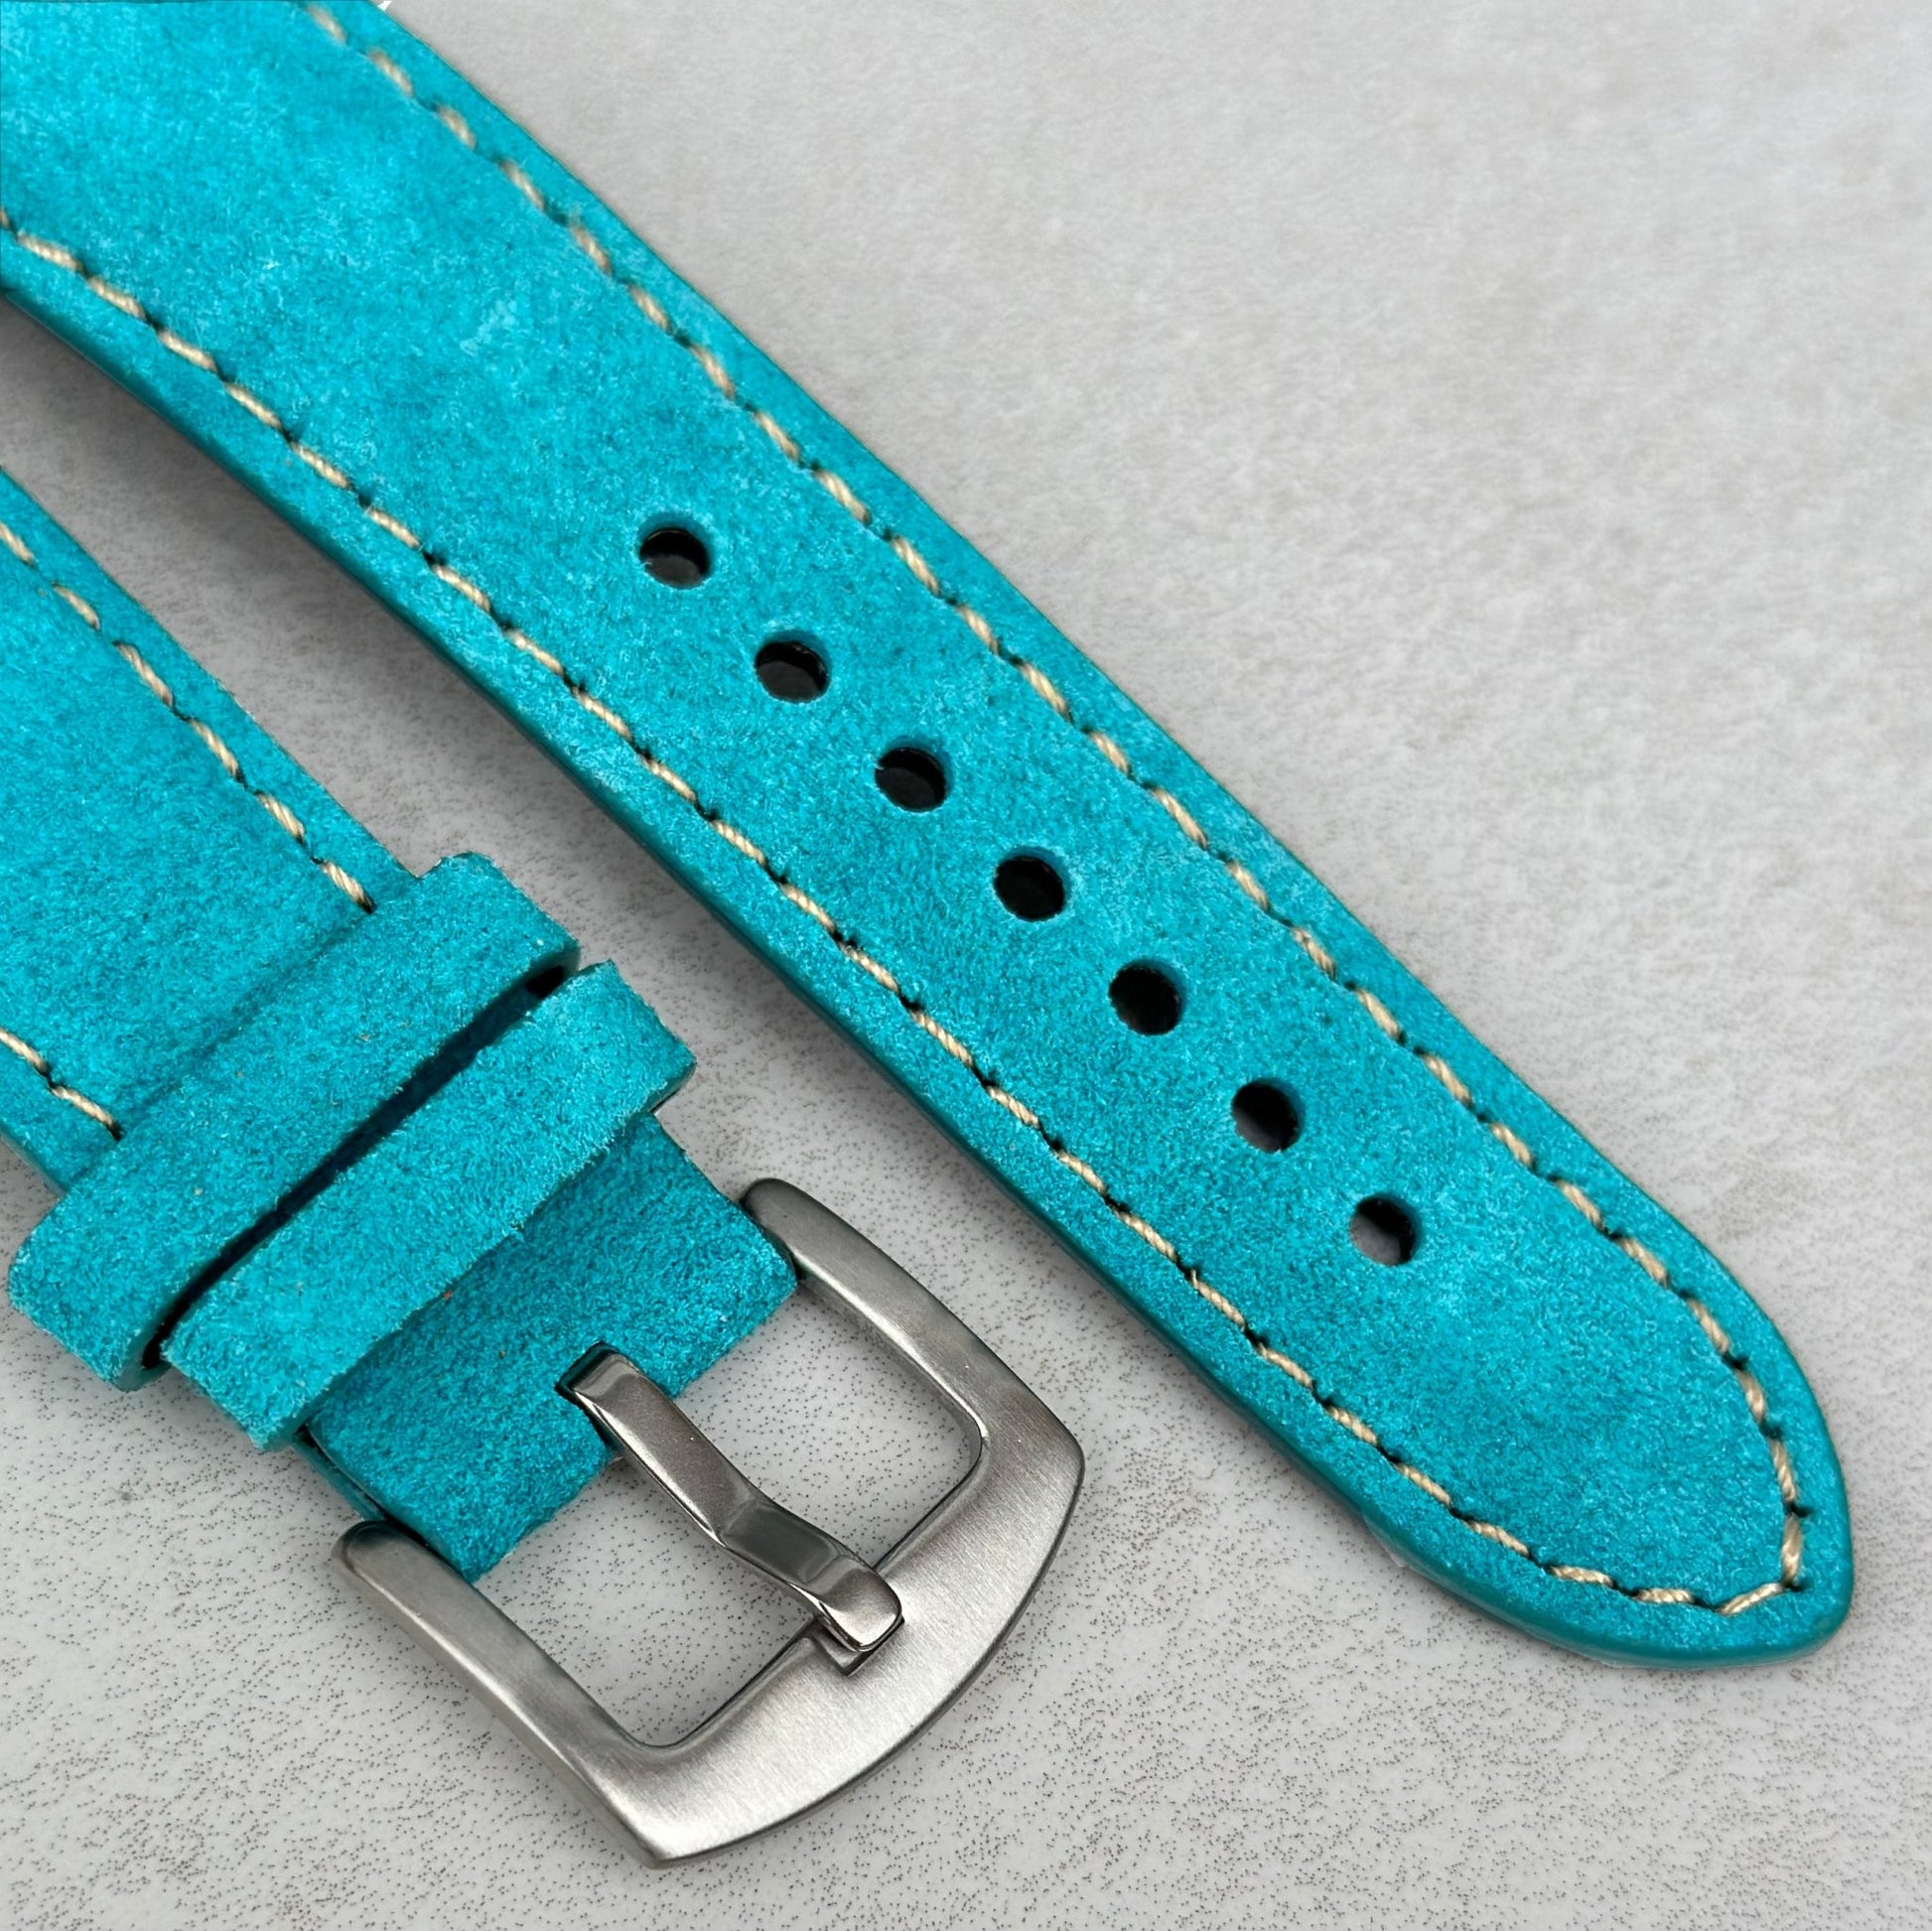 Brushed 316L stainless steel buckle on the Paris turquoise suede watch strap. Watch And Strap.